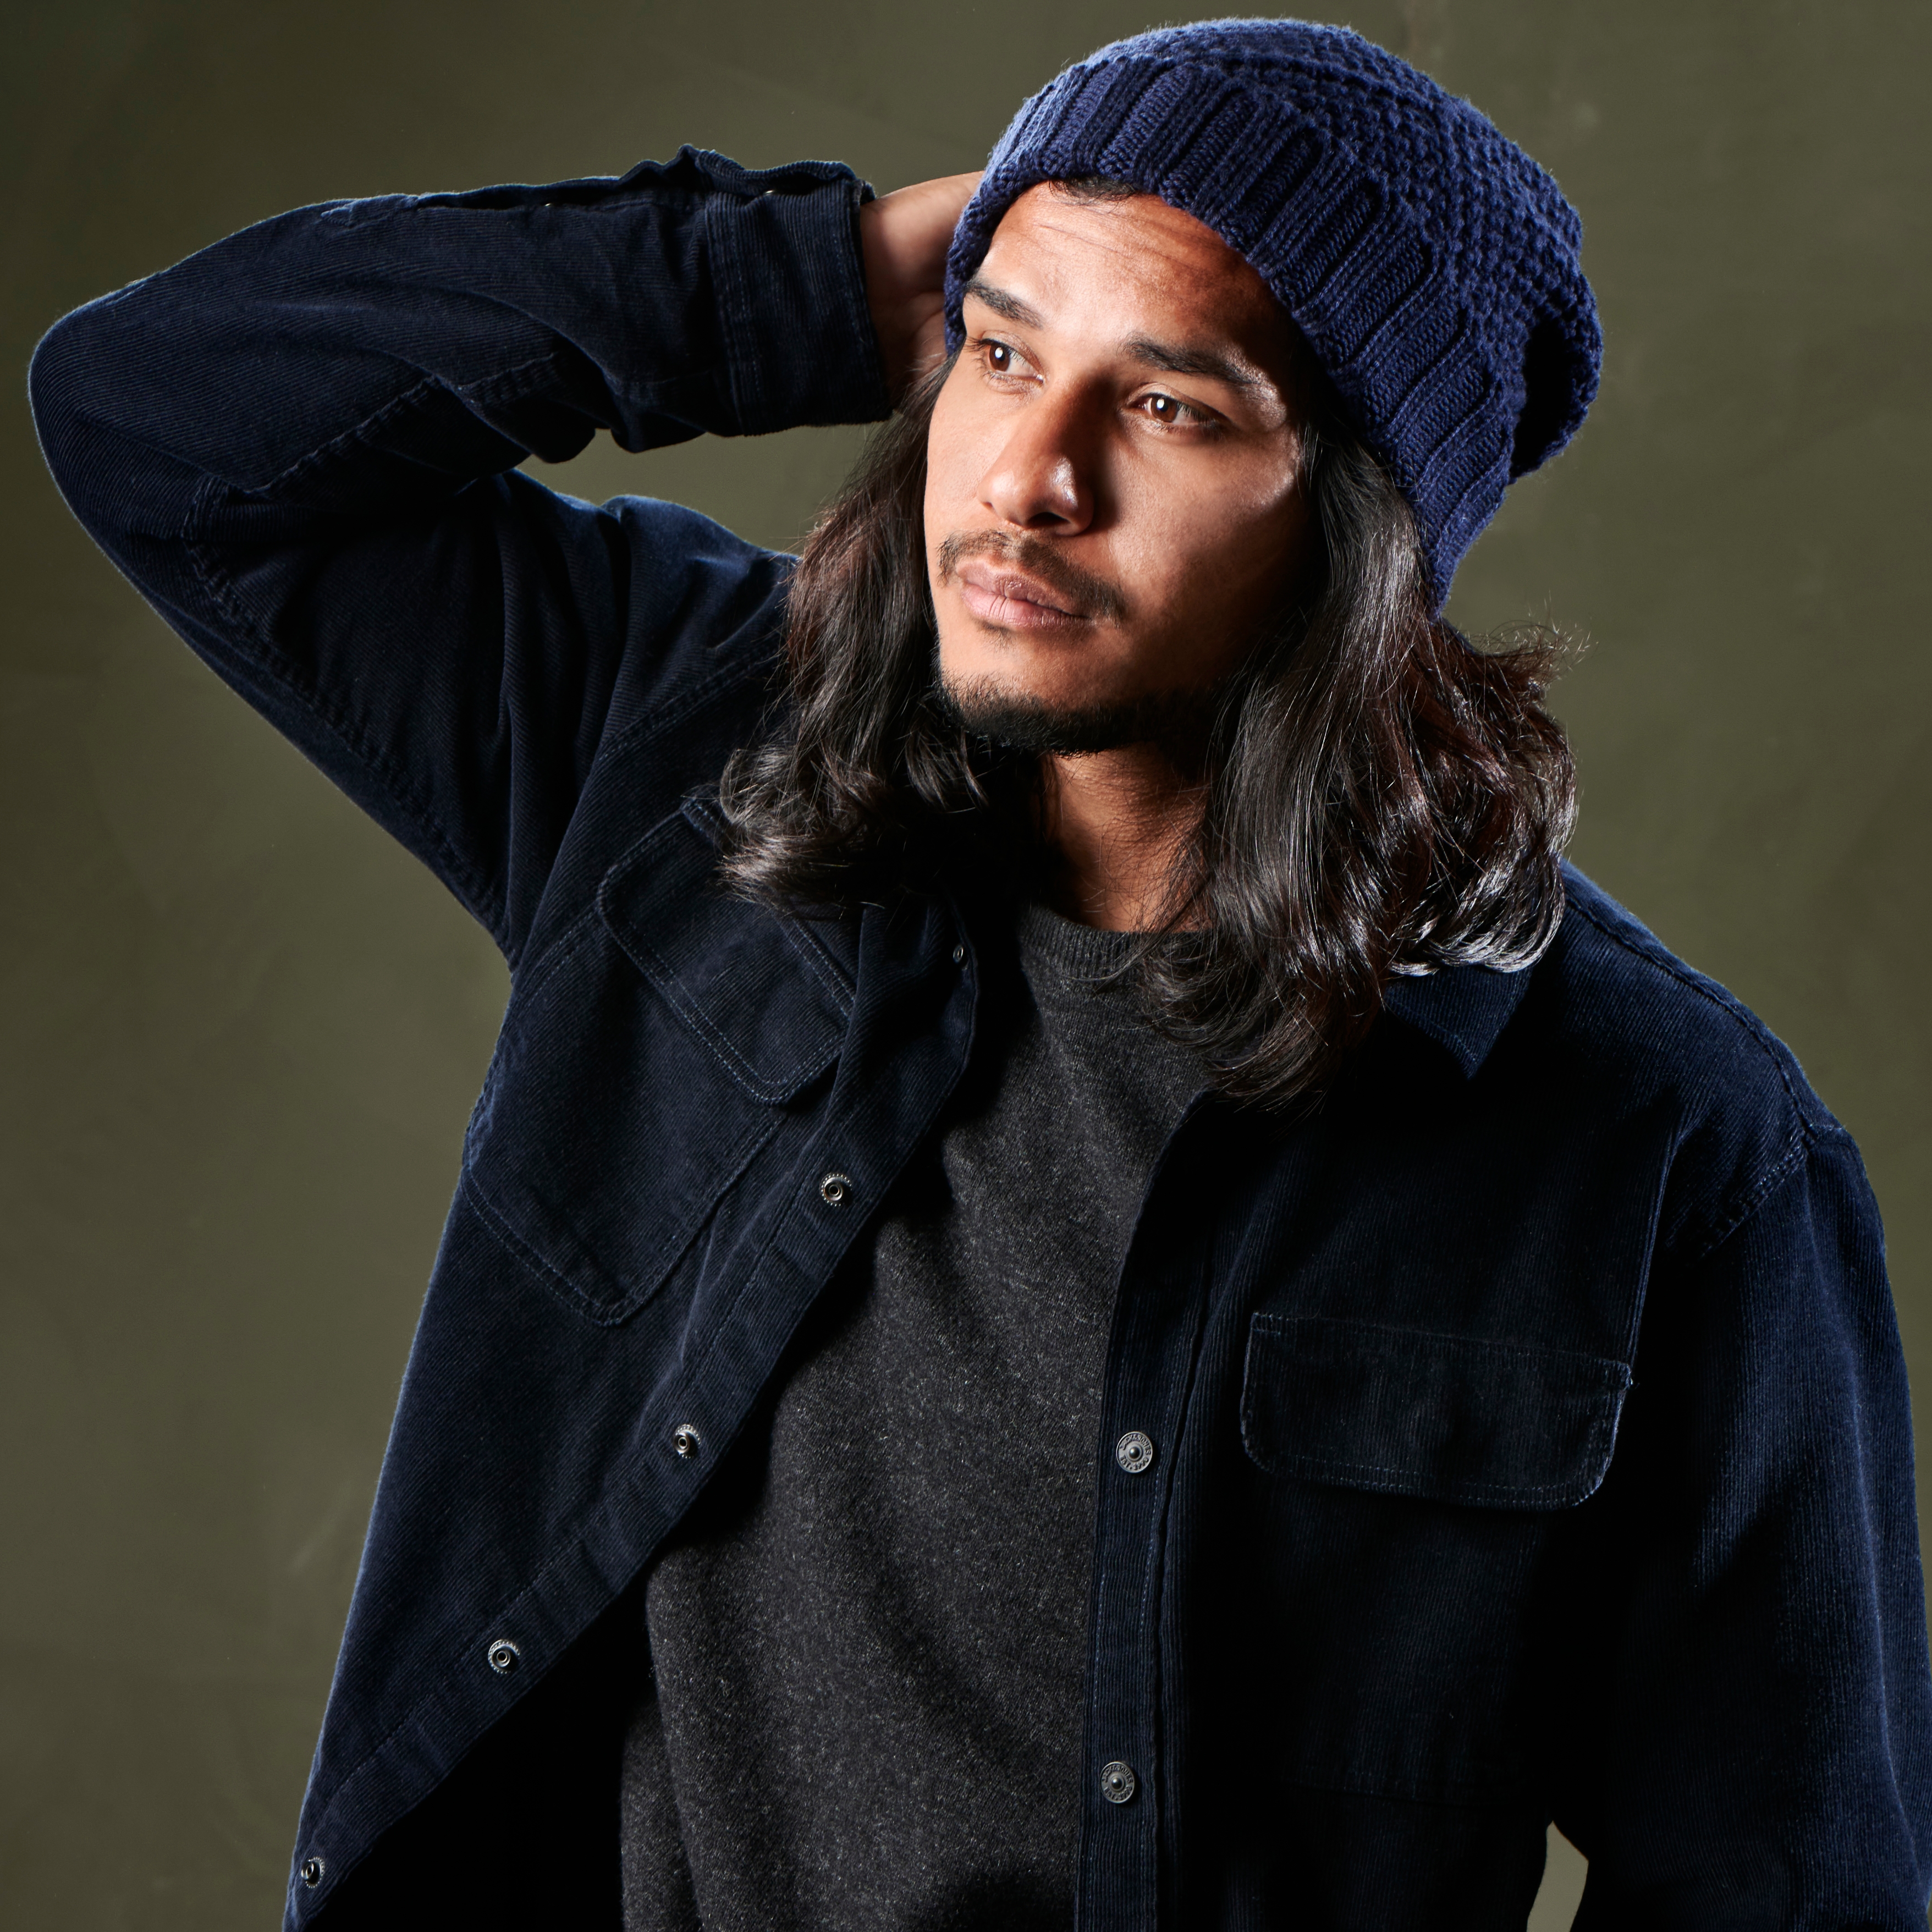 How to Wear a Beanie: Ultimate Guide for Men